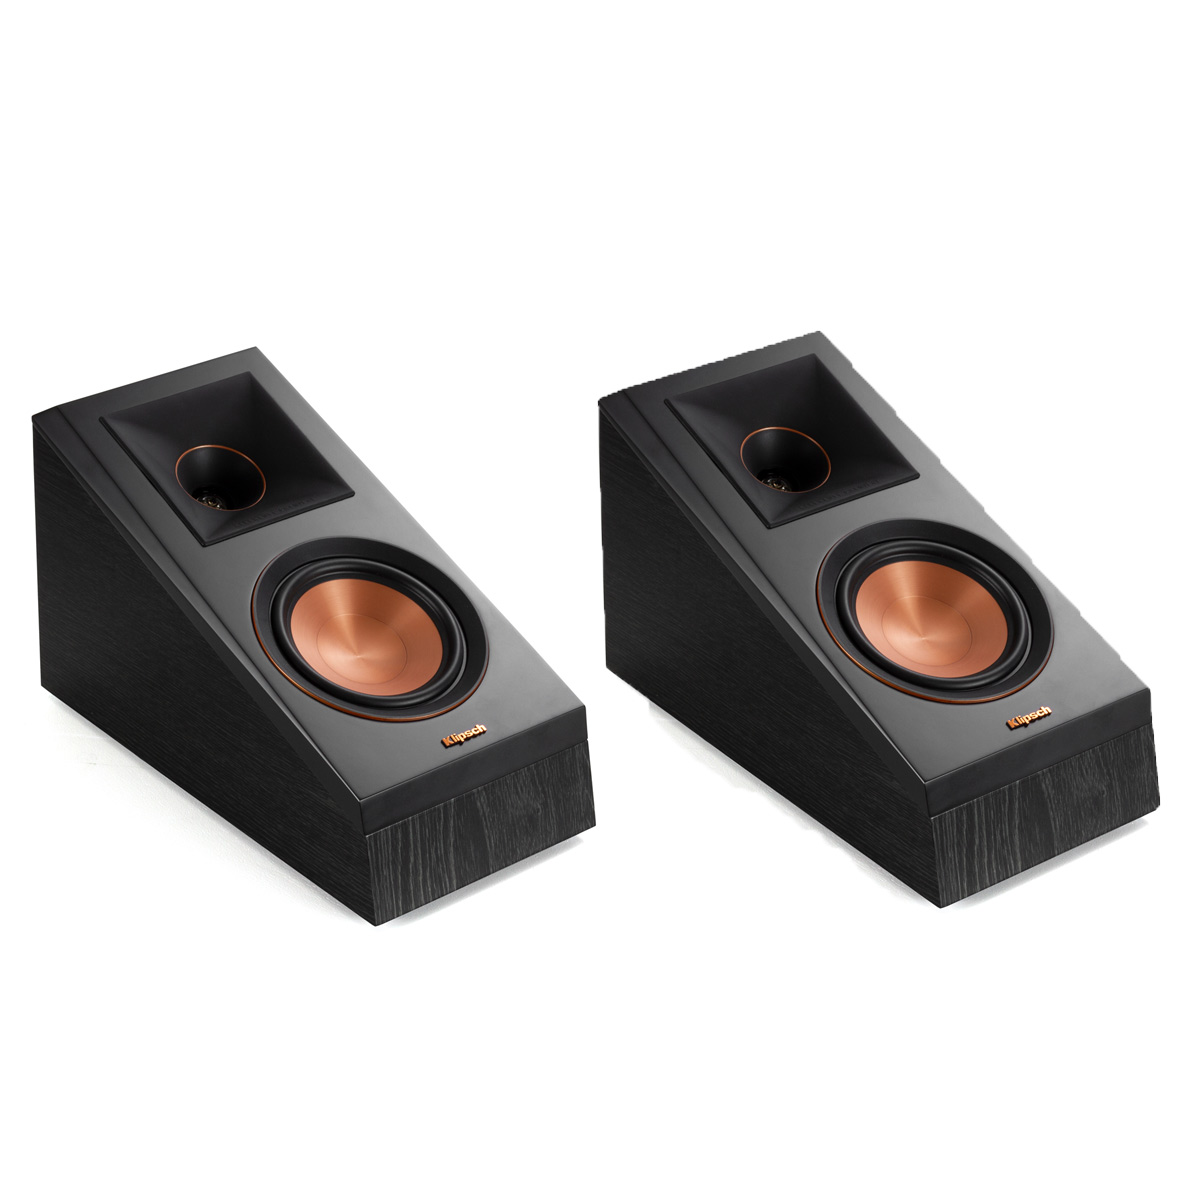 Klipsch RP-500SA Reference Premiere Dolby Atmos Speakers - Pair (Ebony) - image 1 of 7